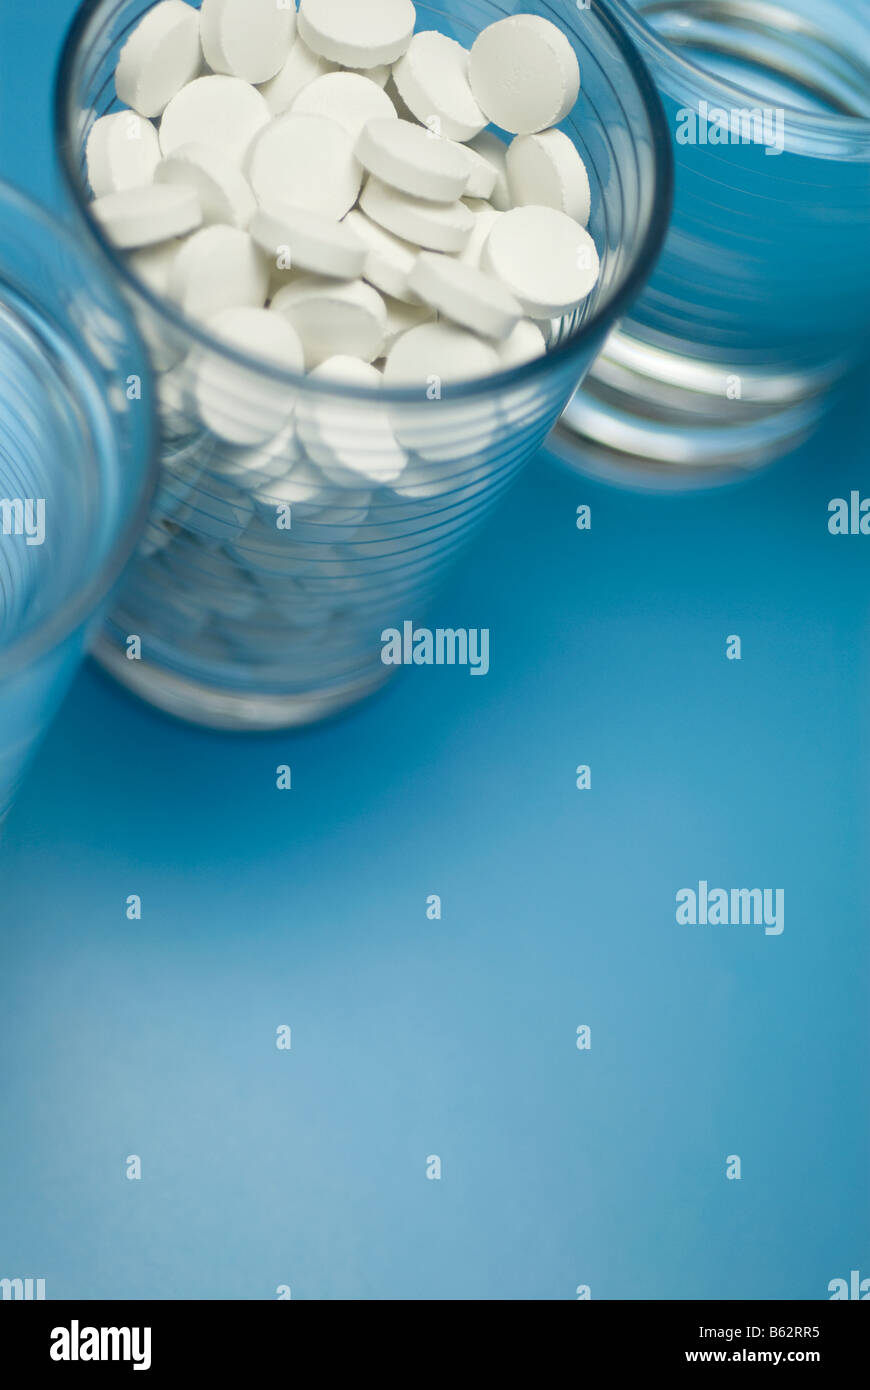 Close-up of a glass full of pills with two glasses of water Stock Photo